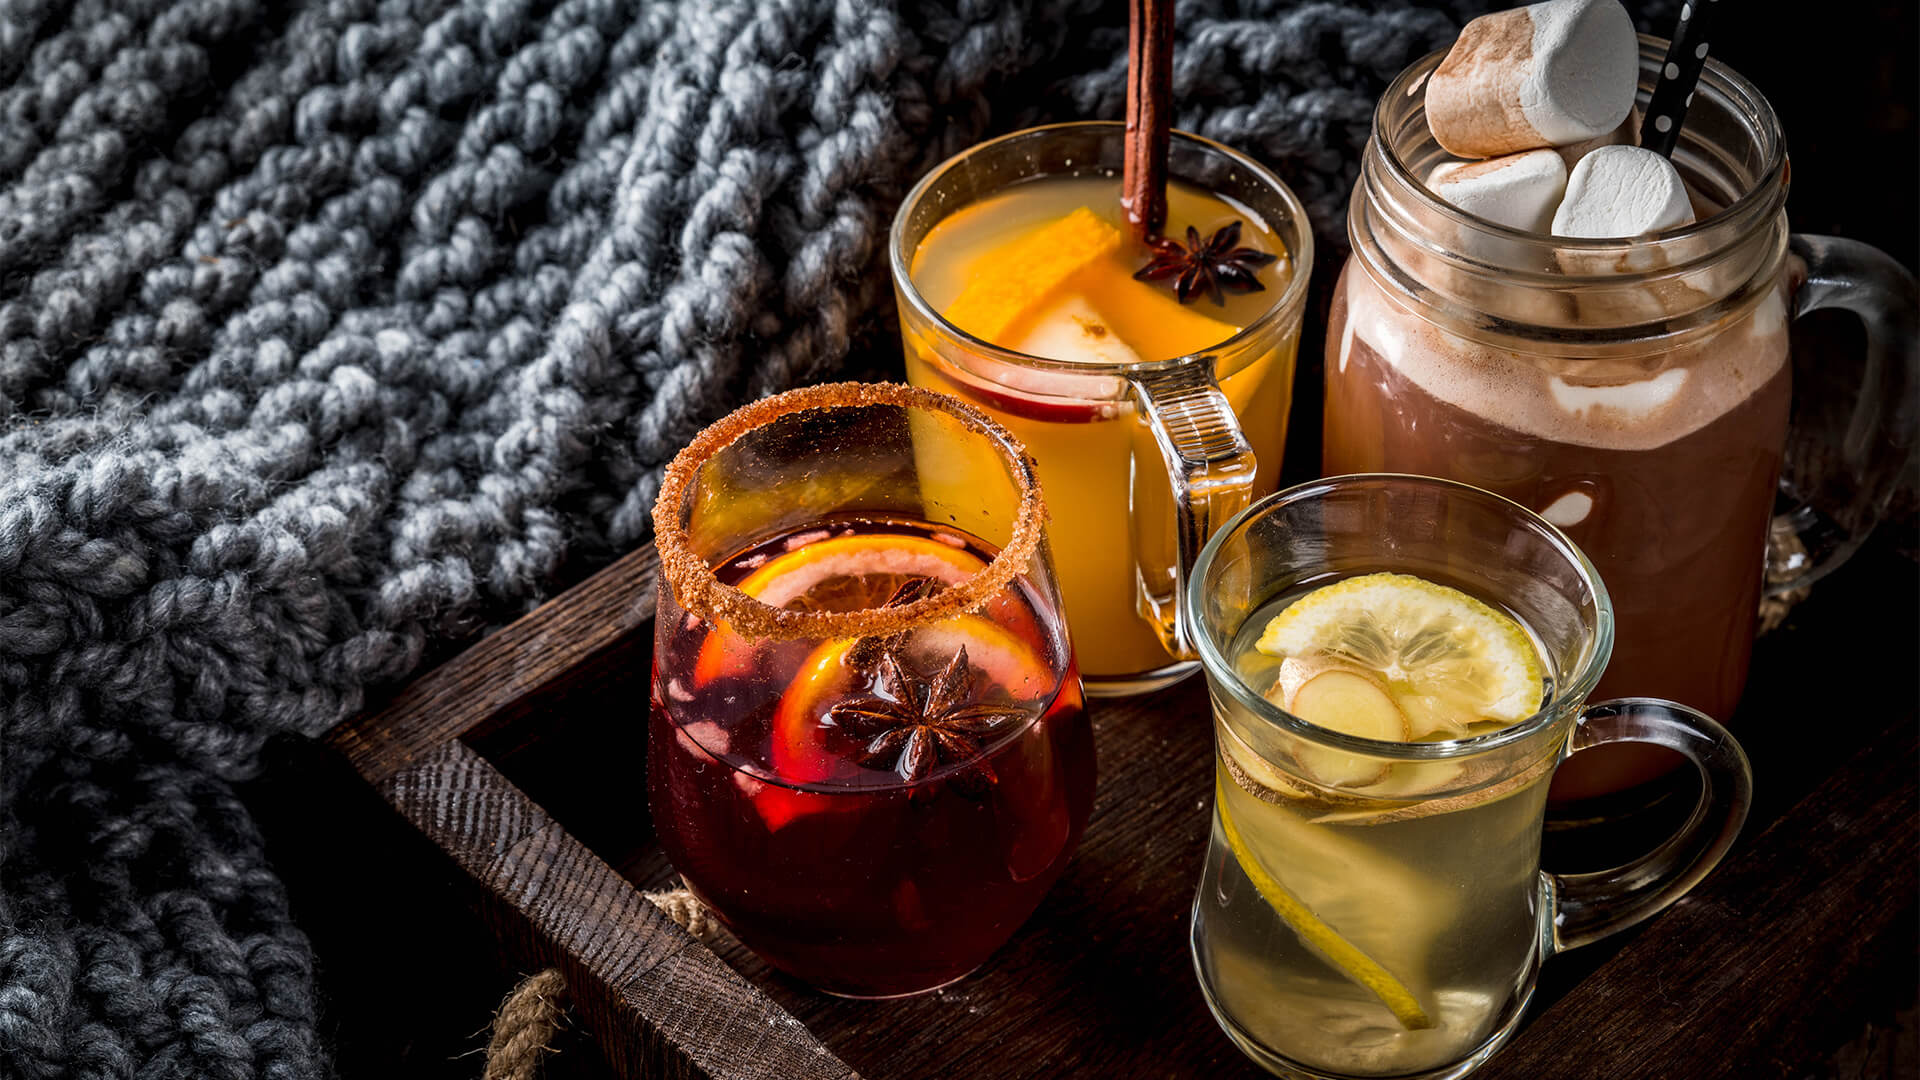 Selection of various autumn traditional drinks: hot chocolate with marshmallow, tea with lemon and ginger, white pumpkin spicy sangria, mulled wine. On wooden rustic table,